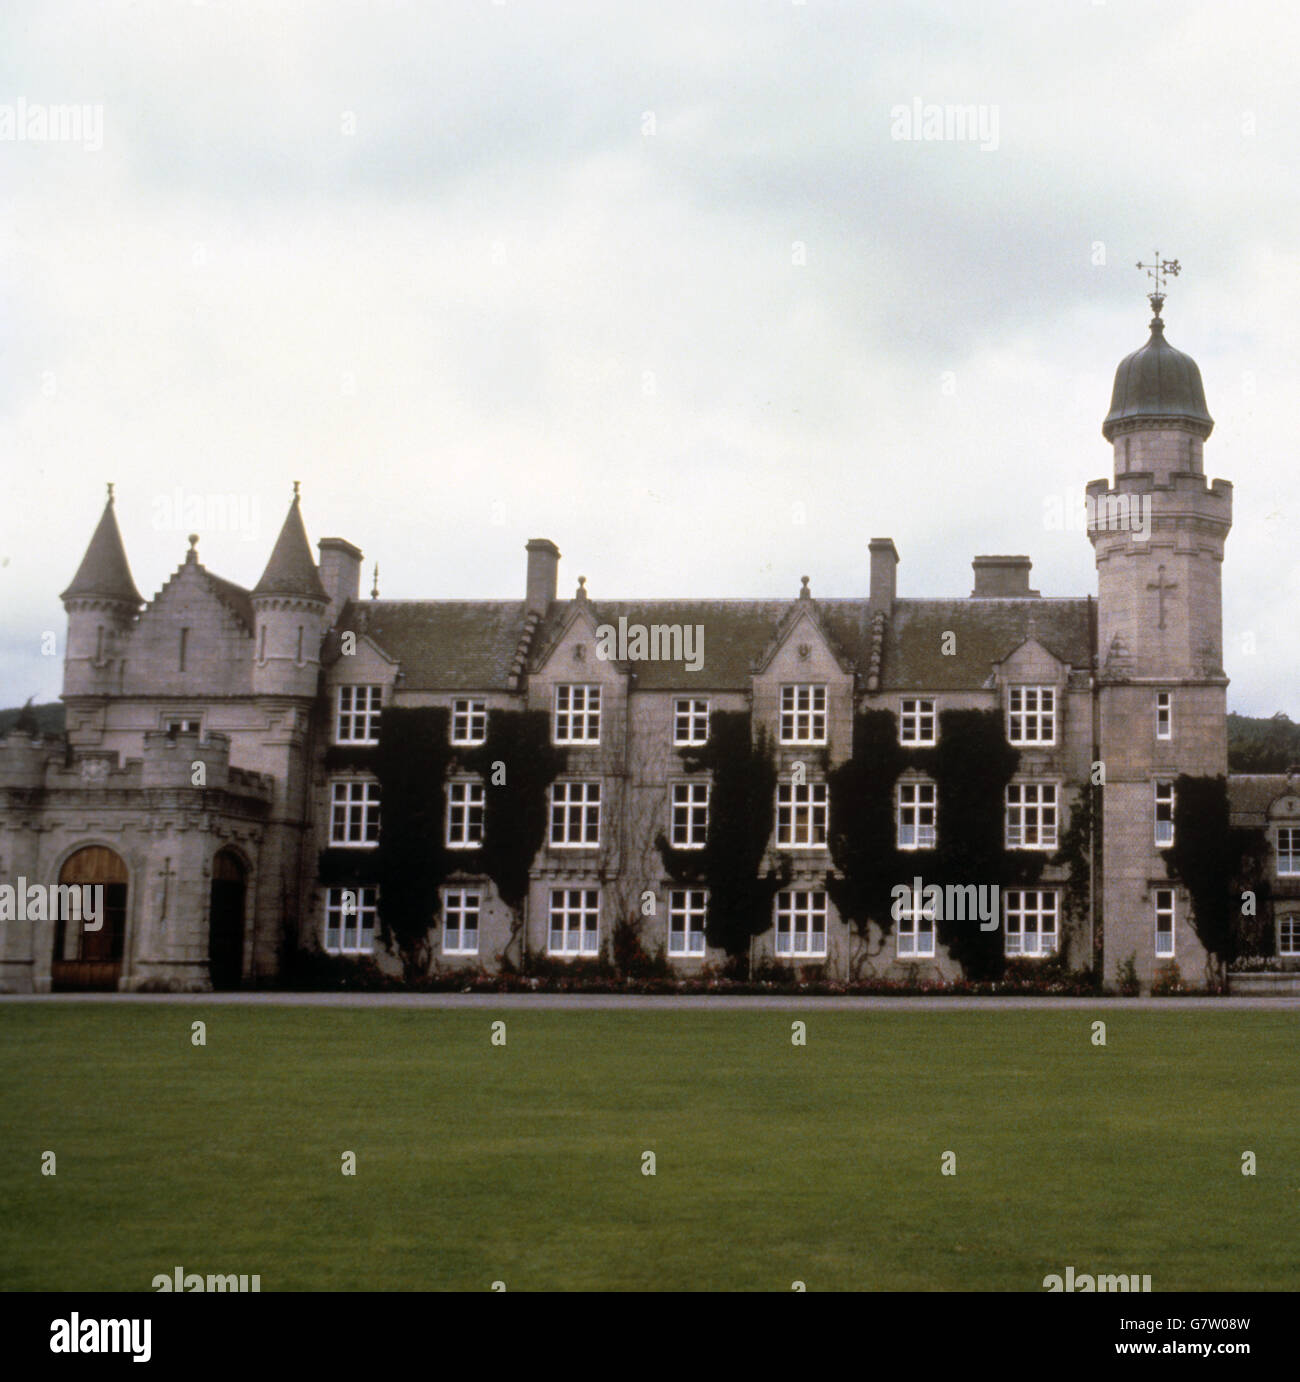 Balmoral Castle, Aberdeenshire, the 19th Century holiday home where the Queen and members of the Royal Family spend their traditional holidays between August and September each year. Stock Photo